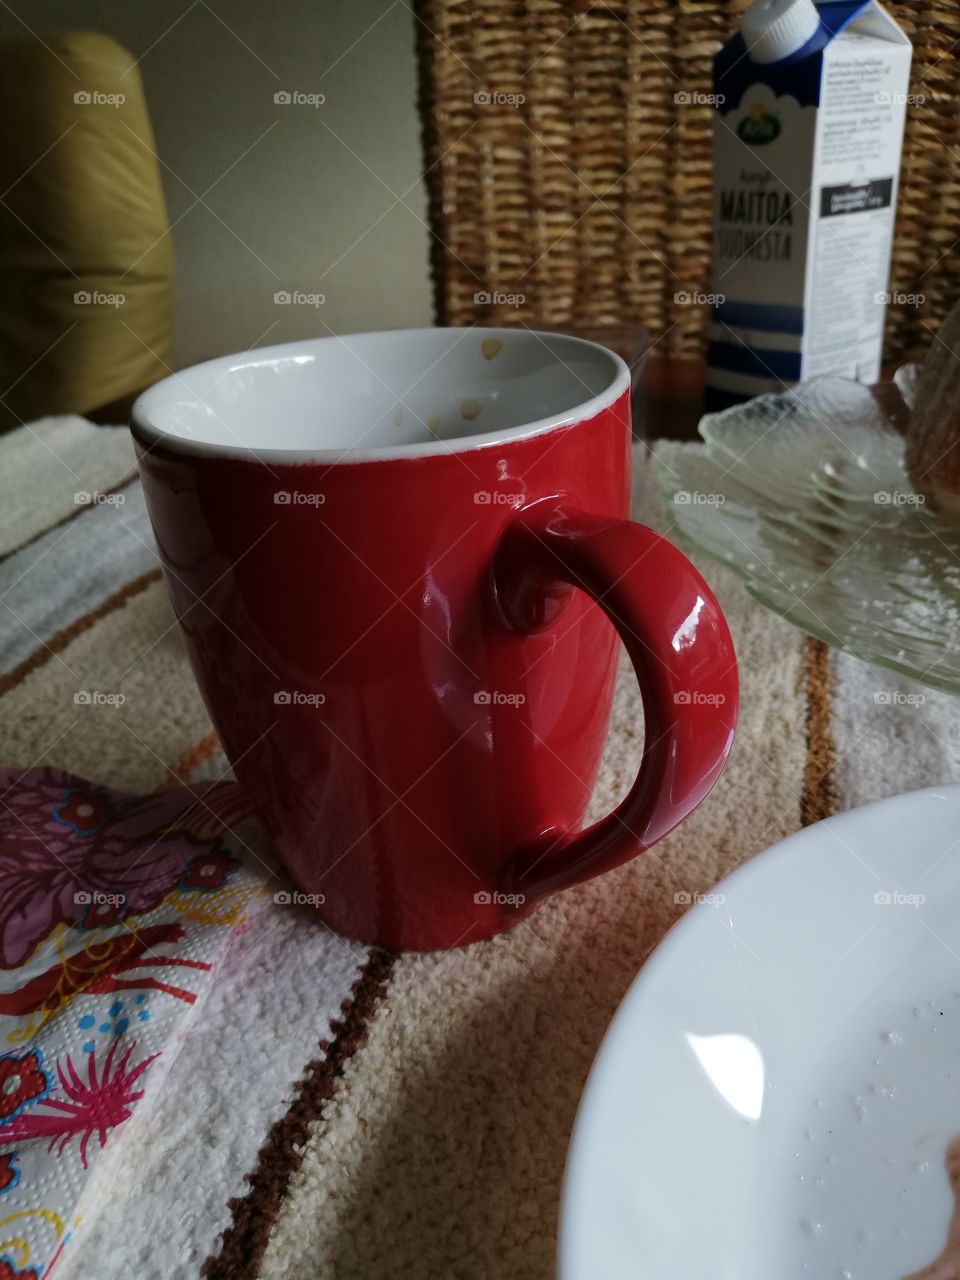 A red mug on a white, beige and brown striped table cloth. A clear decorated plate, a white one with some sugar, a patterned napkin and a milk carton on a brown wooden table. Couple of coffee spots inside the cup. Behind a back of a weaved chair